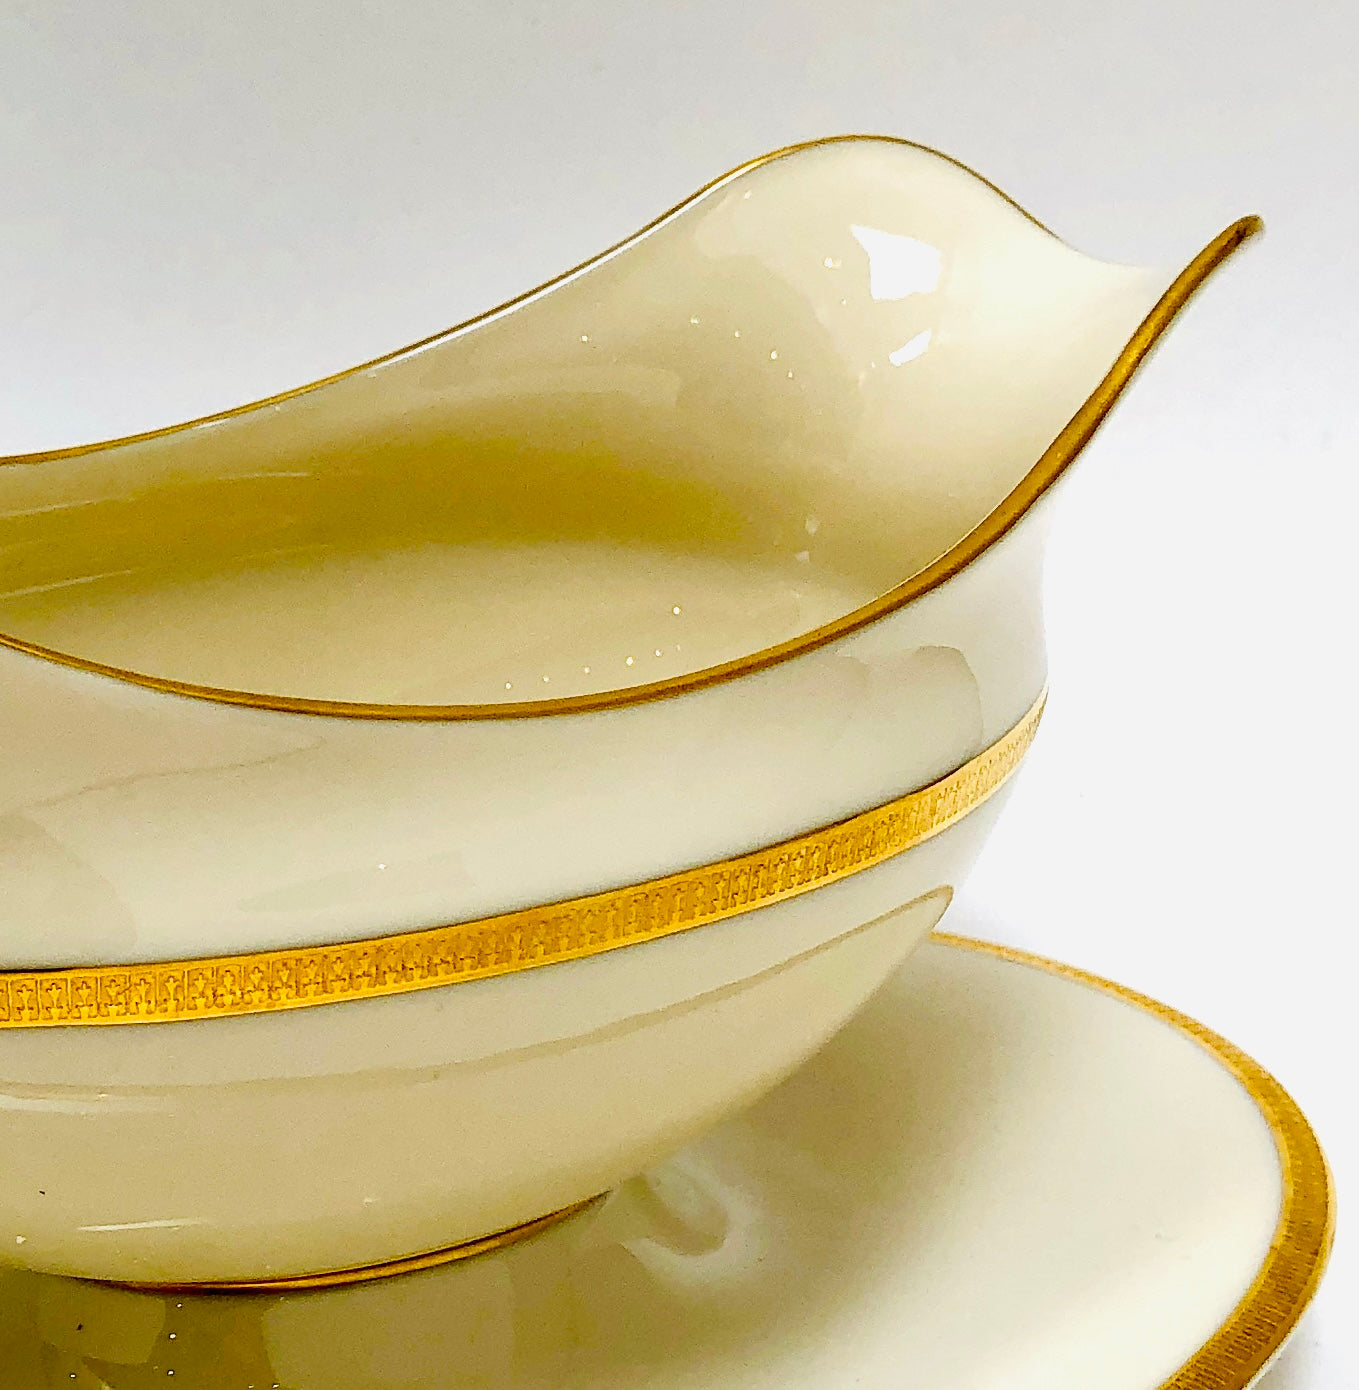 Lenox, Tuxedo, Gravy Boat and Attached Liner, Vintage